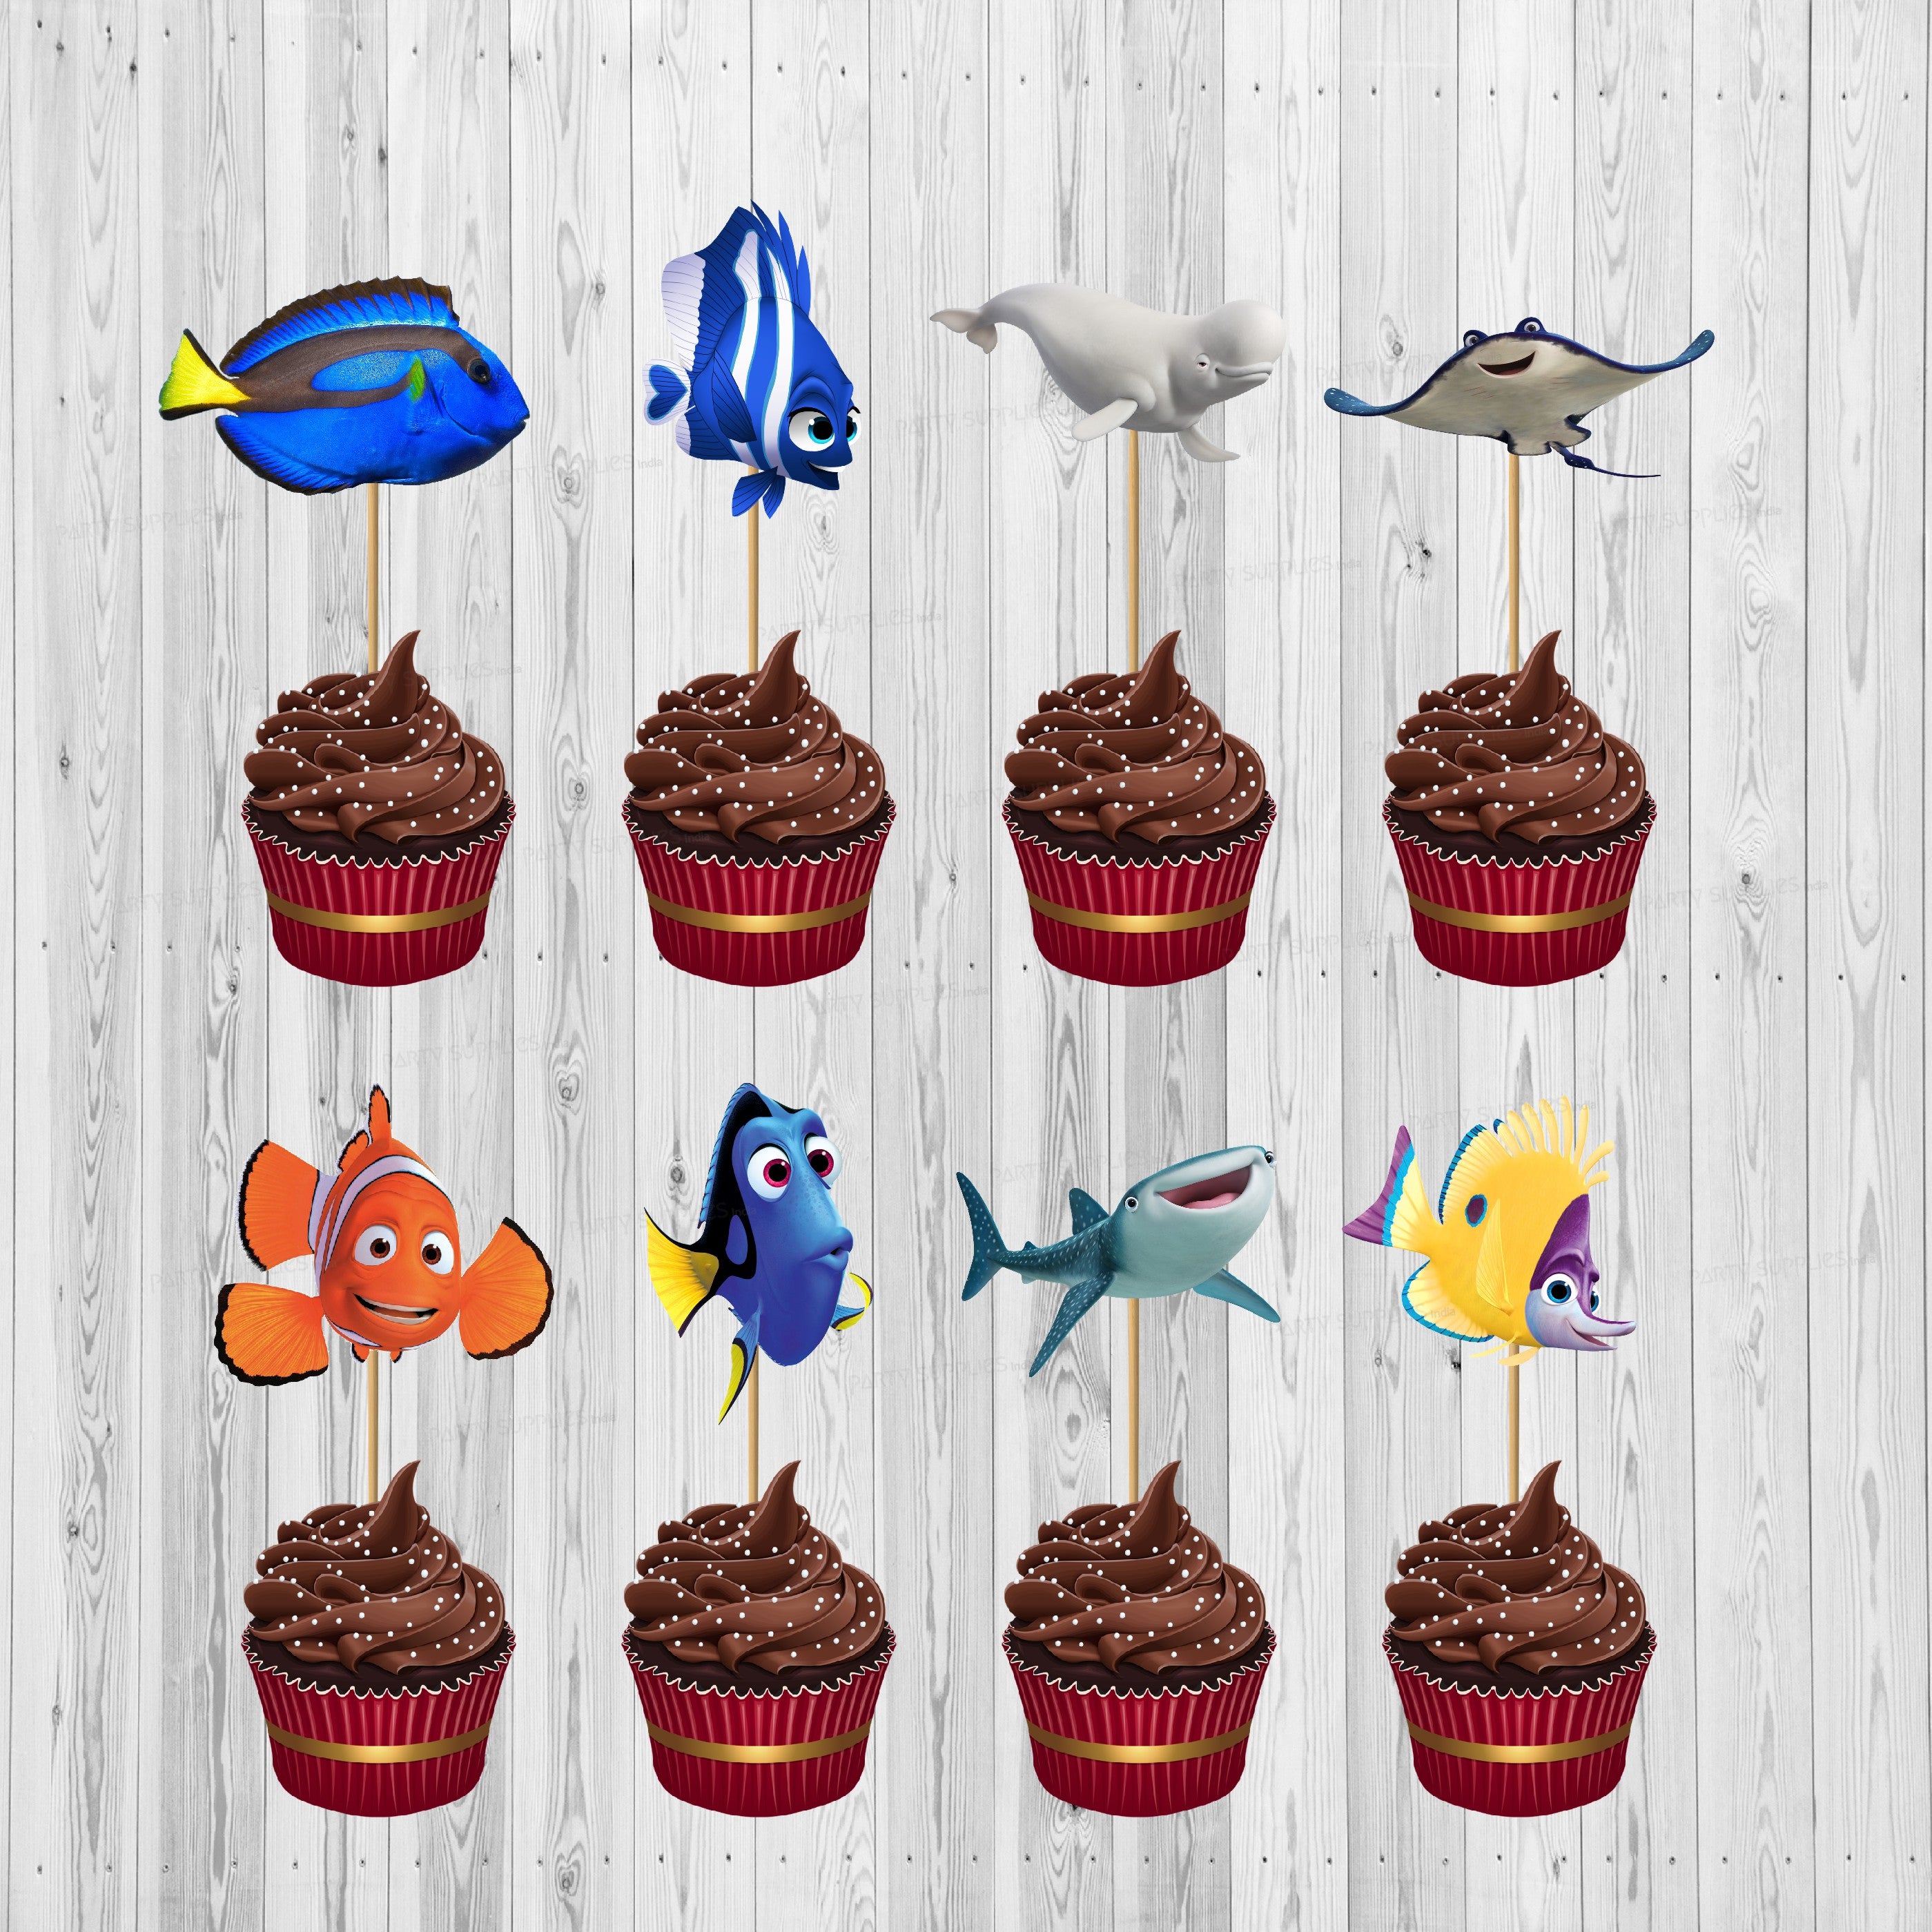 PSI Nemo and Dory Theme Classic Cup Cake Topper